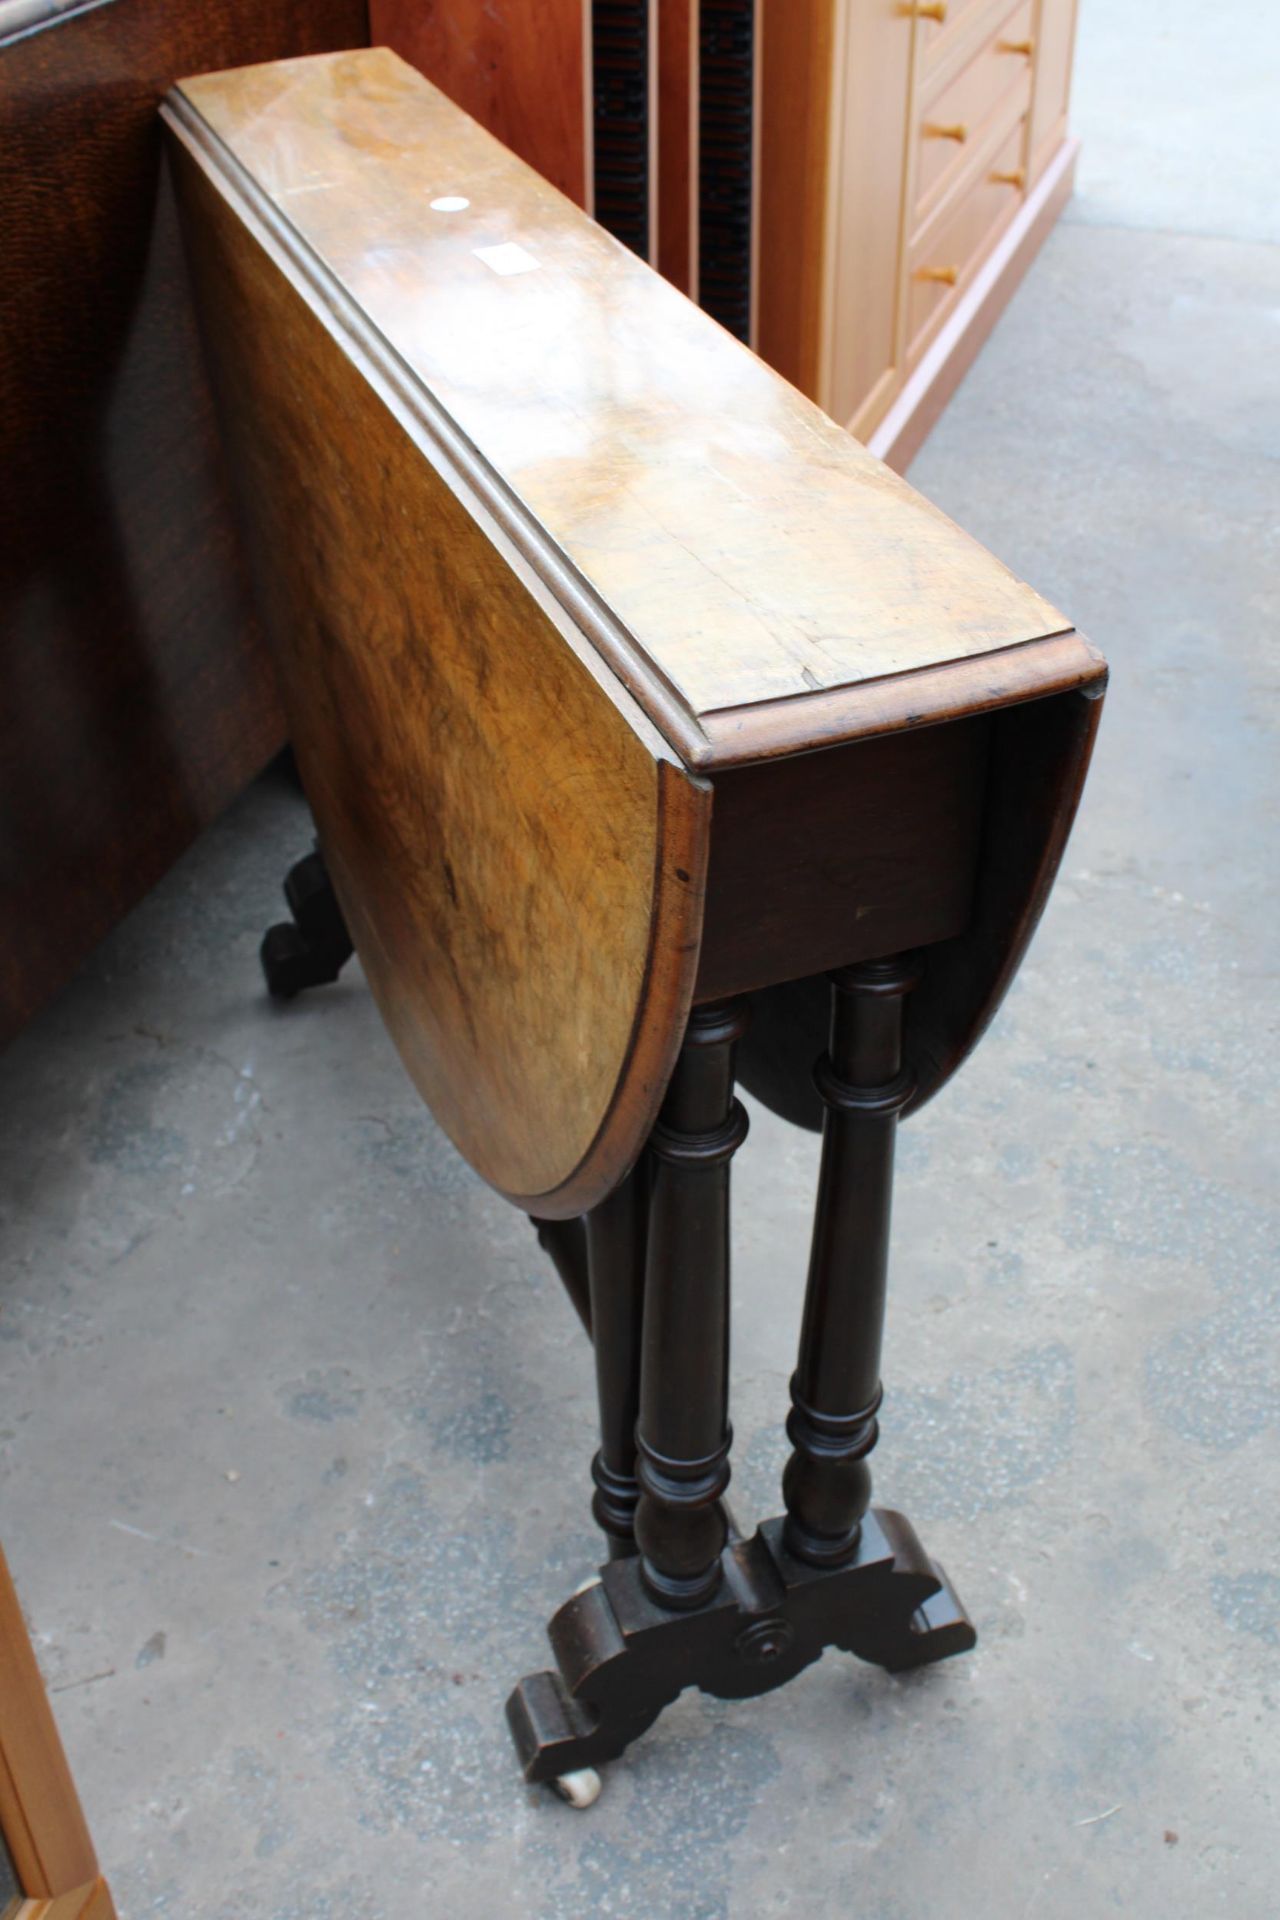 A VICTORIAN WALNUT SUTHERLAND TABLE 41.5" X 35" OPENED - Image 2 of 4